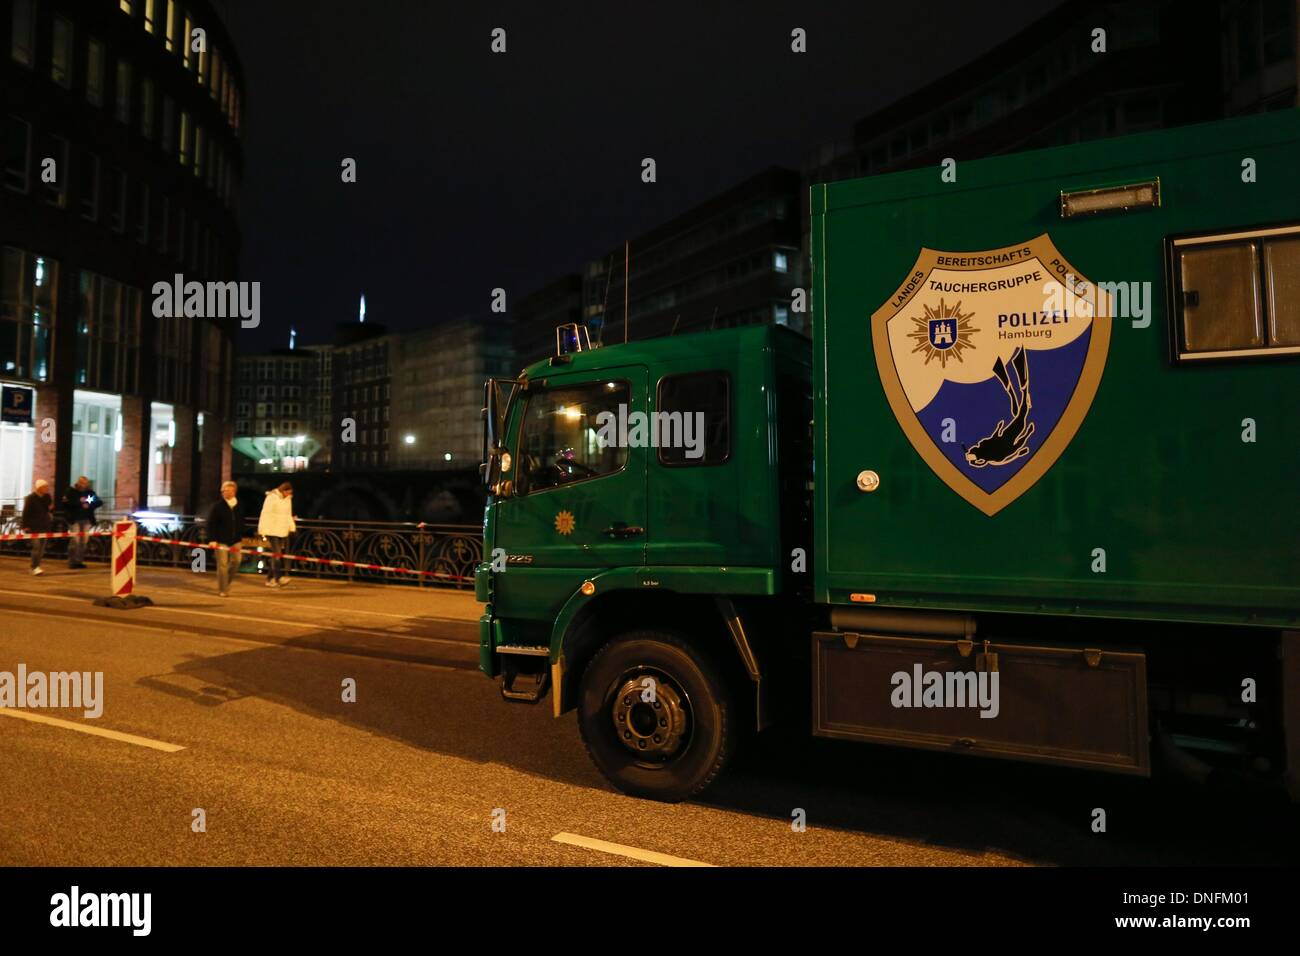 Police divers search for the murder weapon in a fleet at a crime scene in Hamburg, Germany, 25 December 2013. A woman stabbed and fatally injured a man on the street during an escalated dispute. Photo: Paul Weidenbaum/dpa Stock Photo